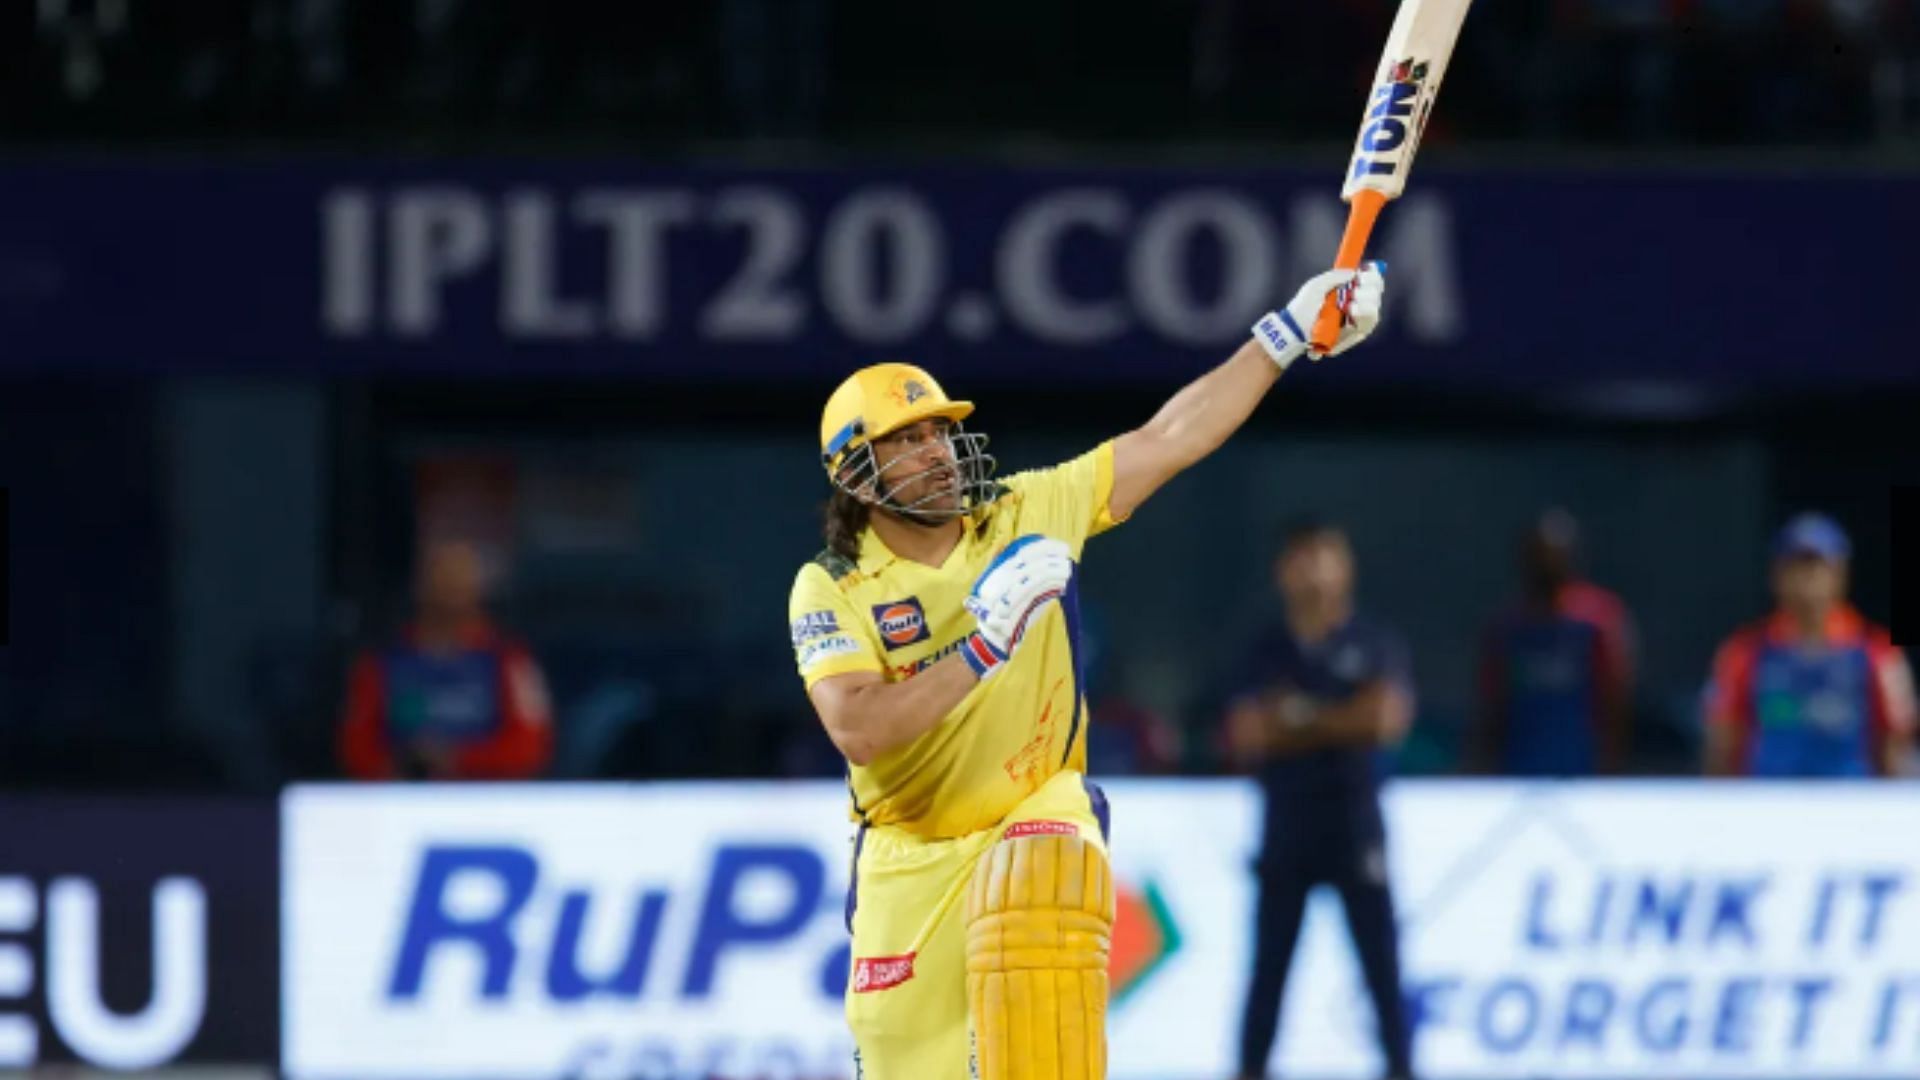 MS Dhoni smashes a one-handed six of Anricn Nortje in the final over. 